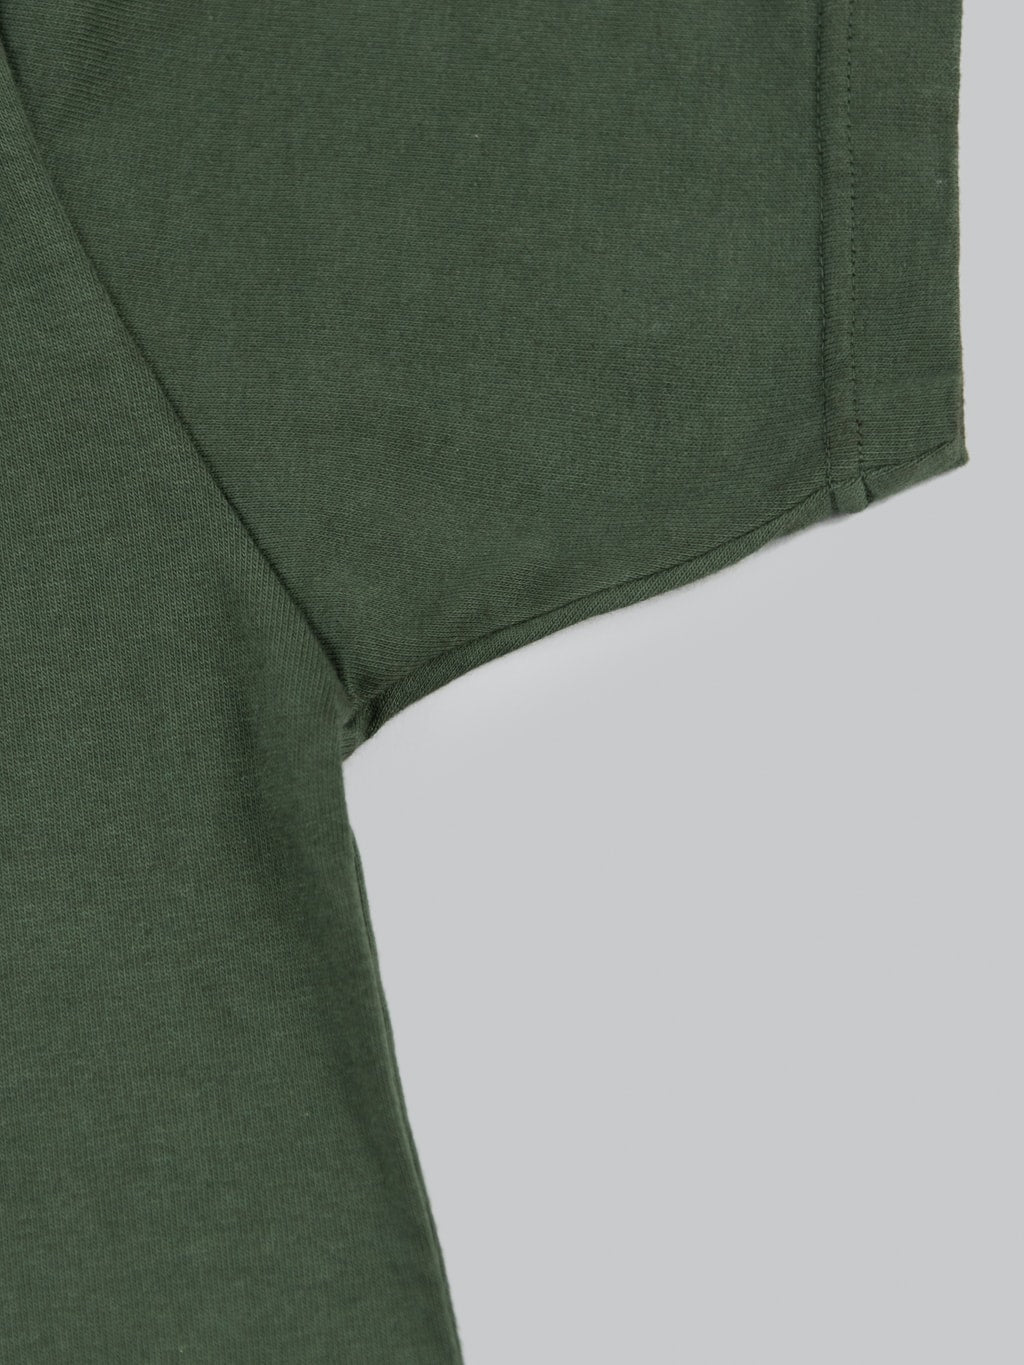 trophy clothing od henley tee olive sleeve texture